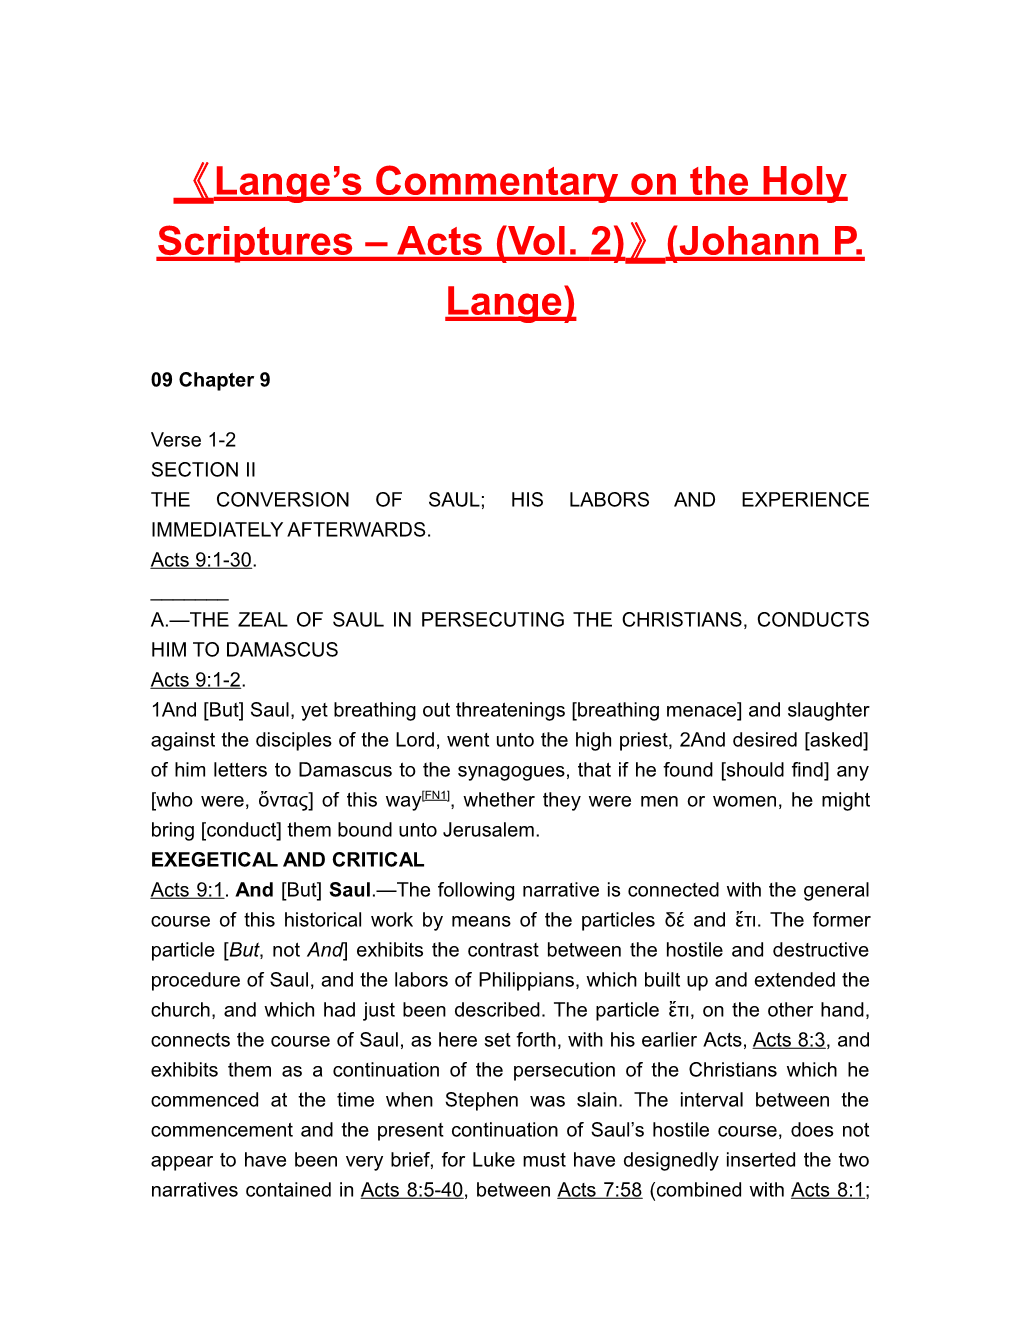 Lange S Commentary on the Holy Scriptures Acts (Vol. 2) (Johann P. Lange)